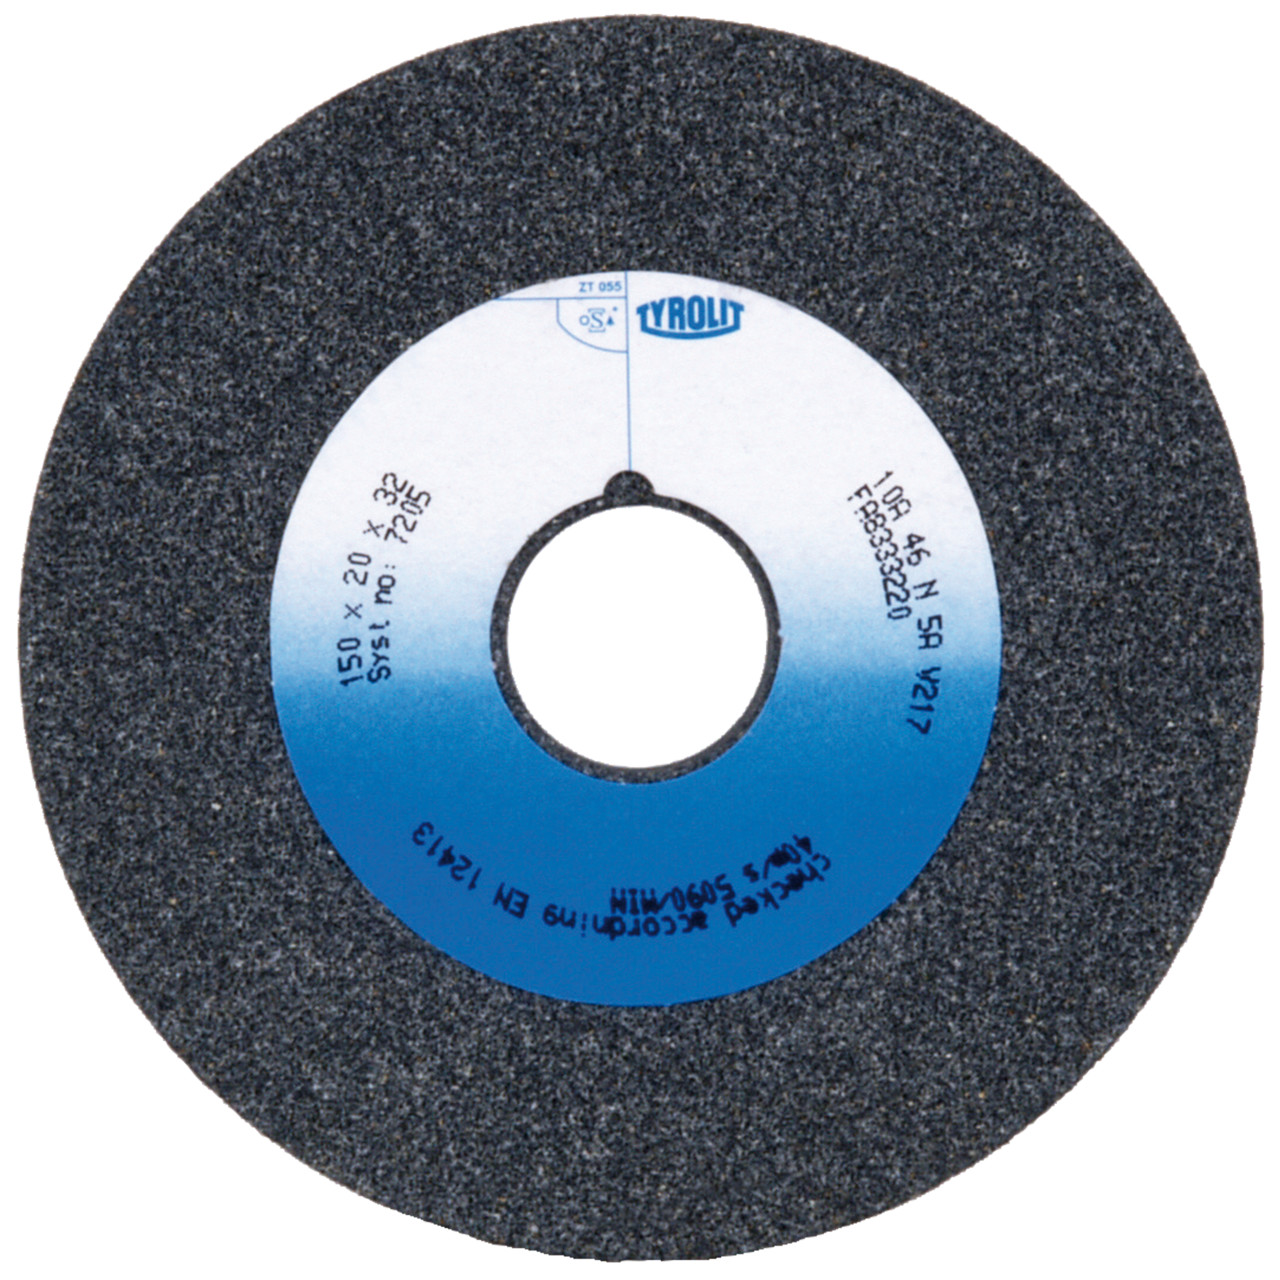 Tyrolit Conventional ceramic grinding discs DxDxH 250x32x51 For unalloyed and low-alloy steels, shape: 1, Art. 737812